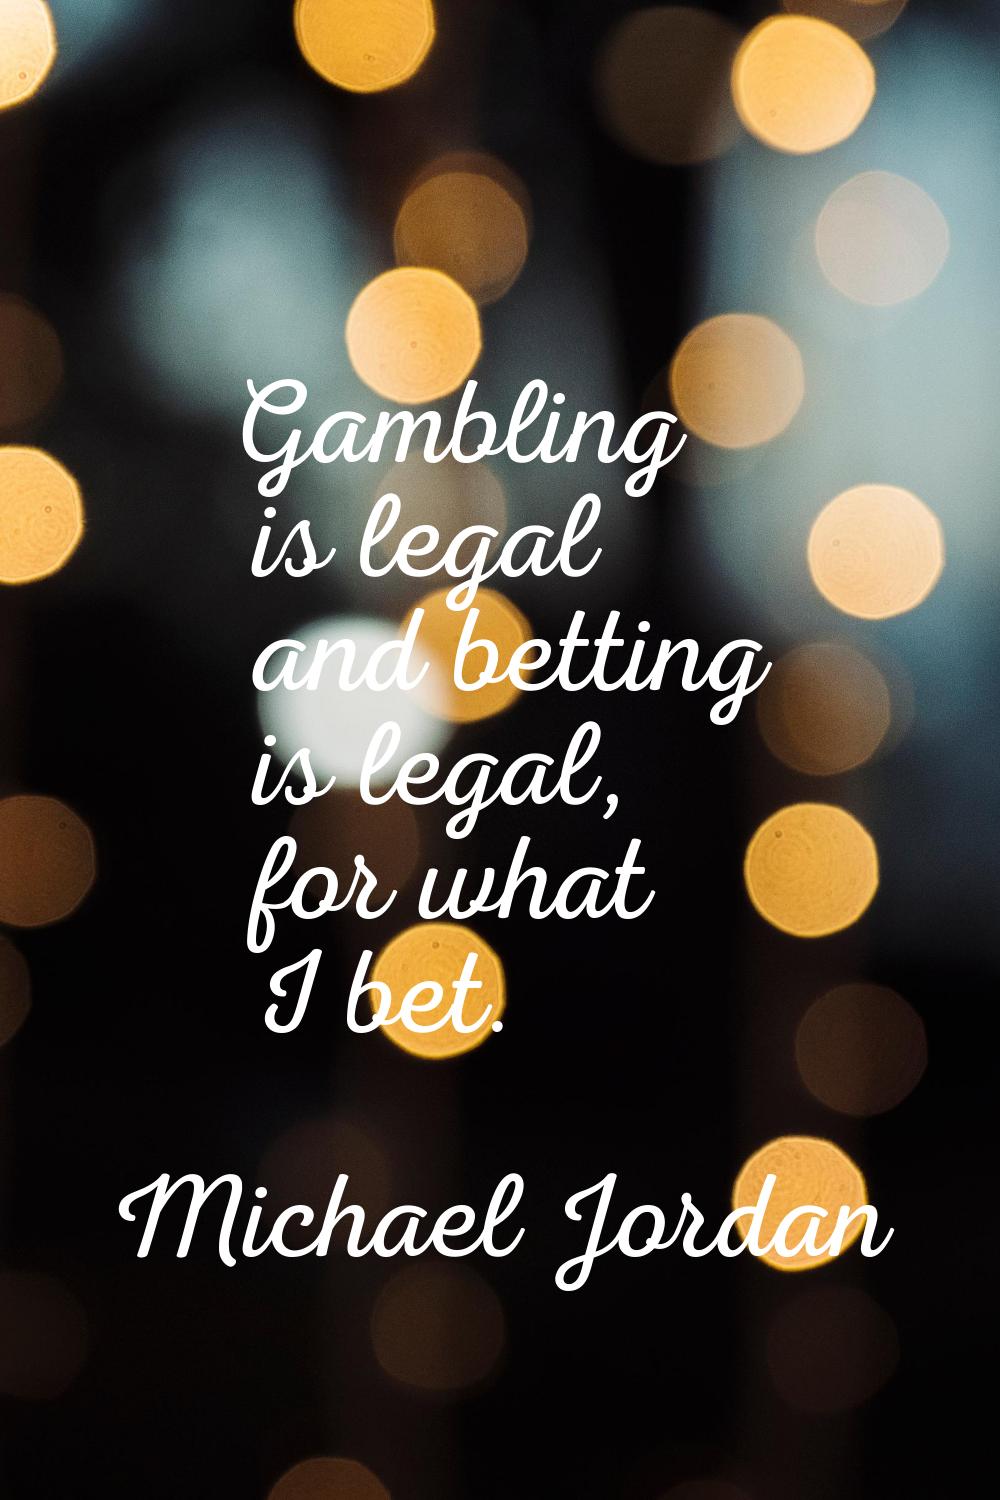 Gambling is legal and betting is legal, for what I bet.